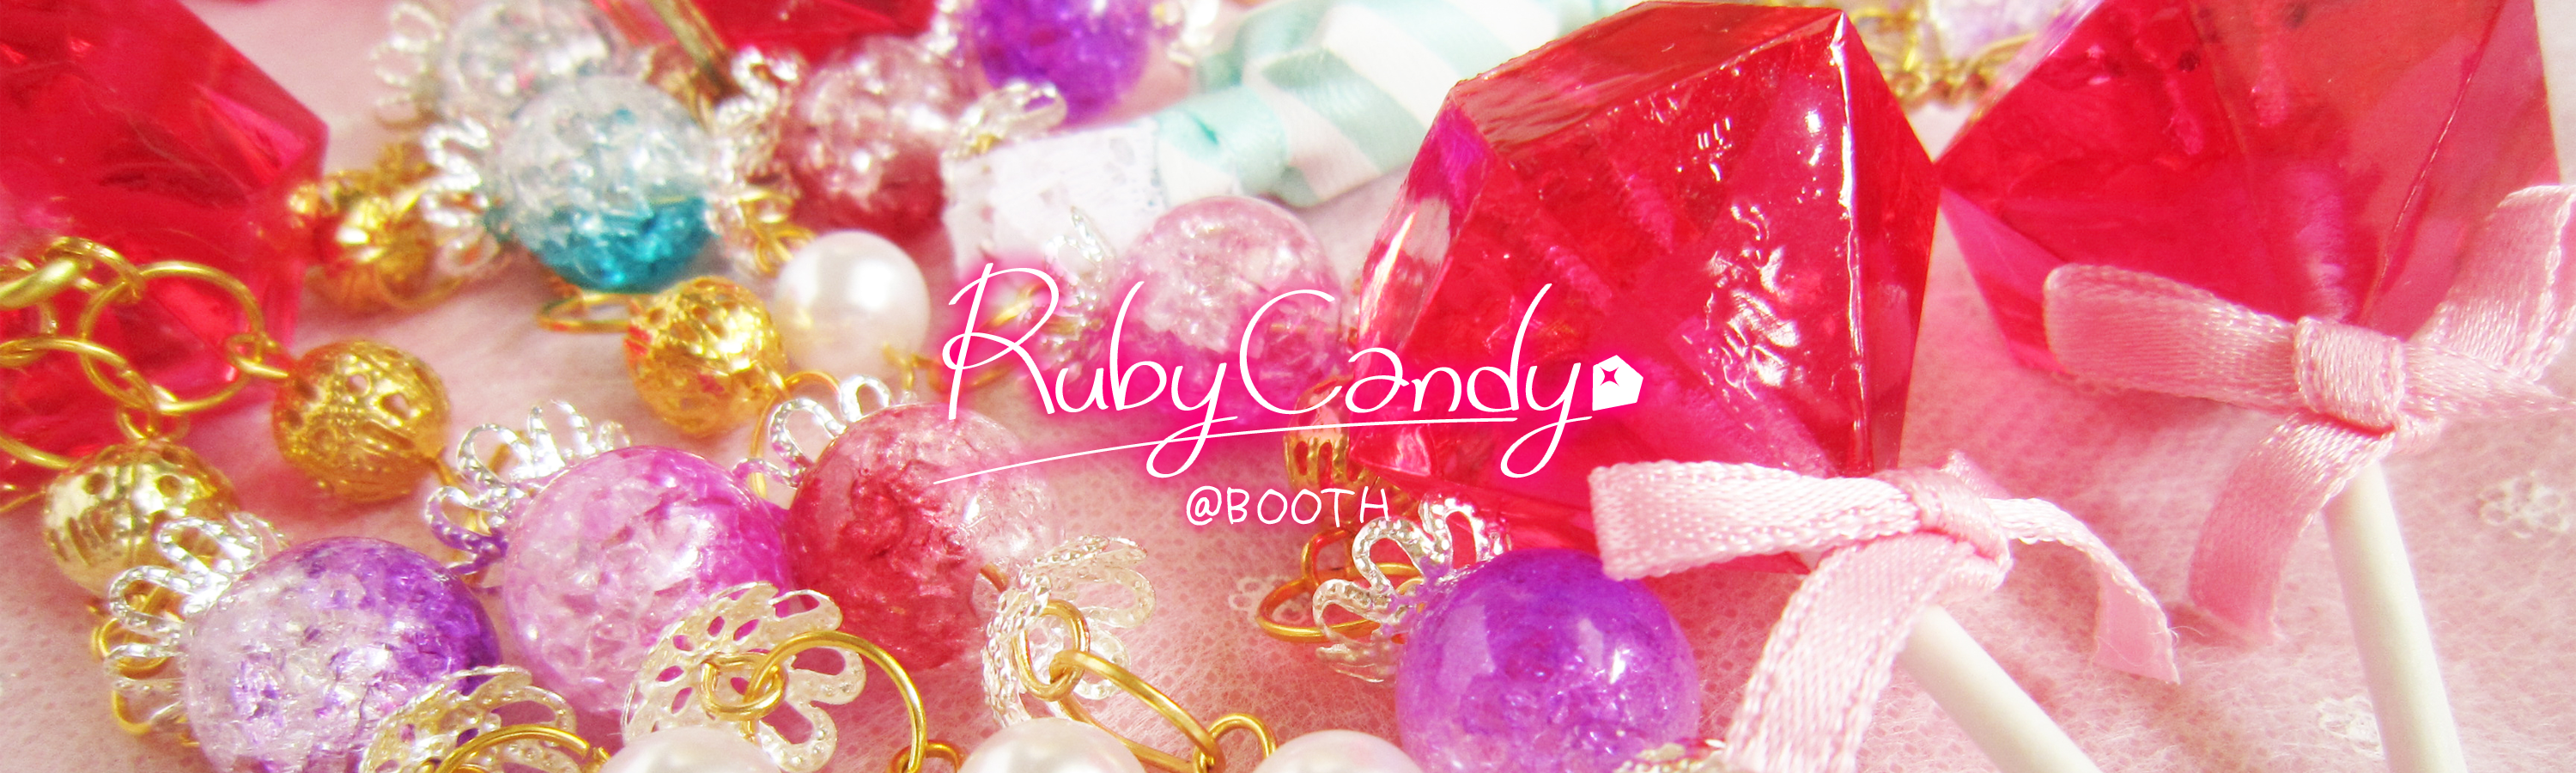 Ruby Candy